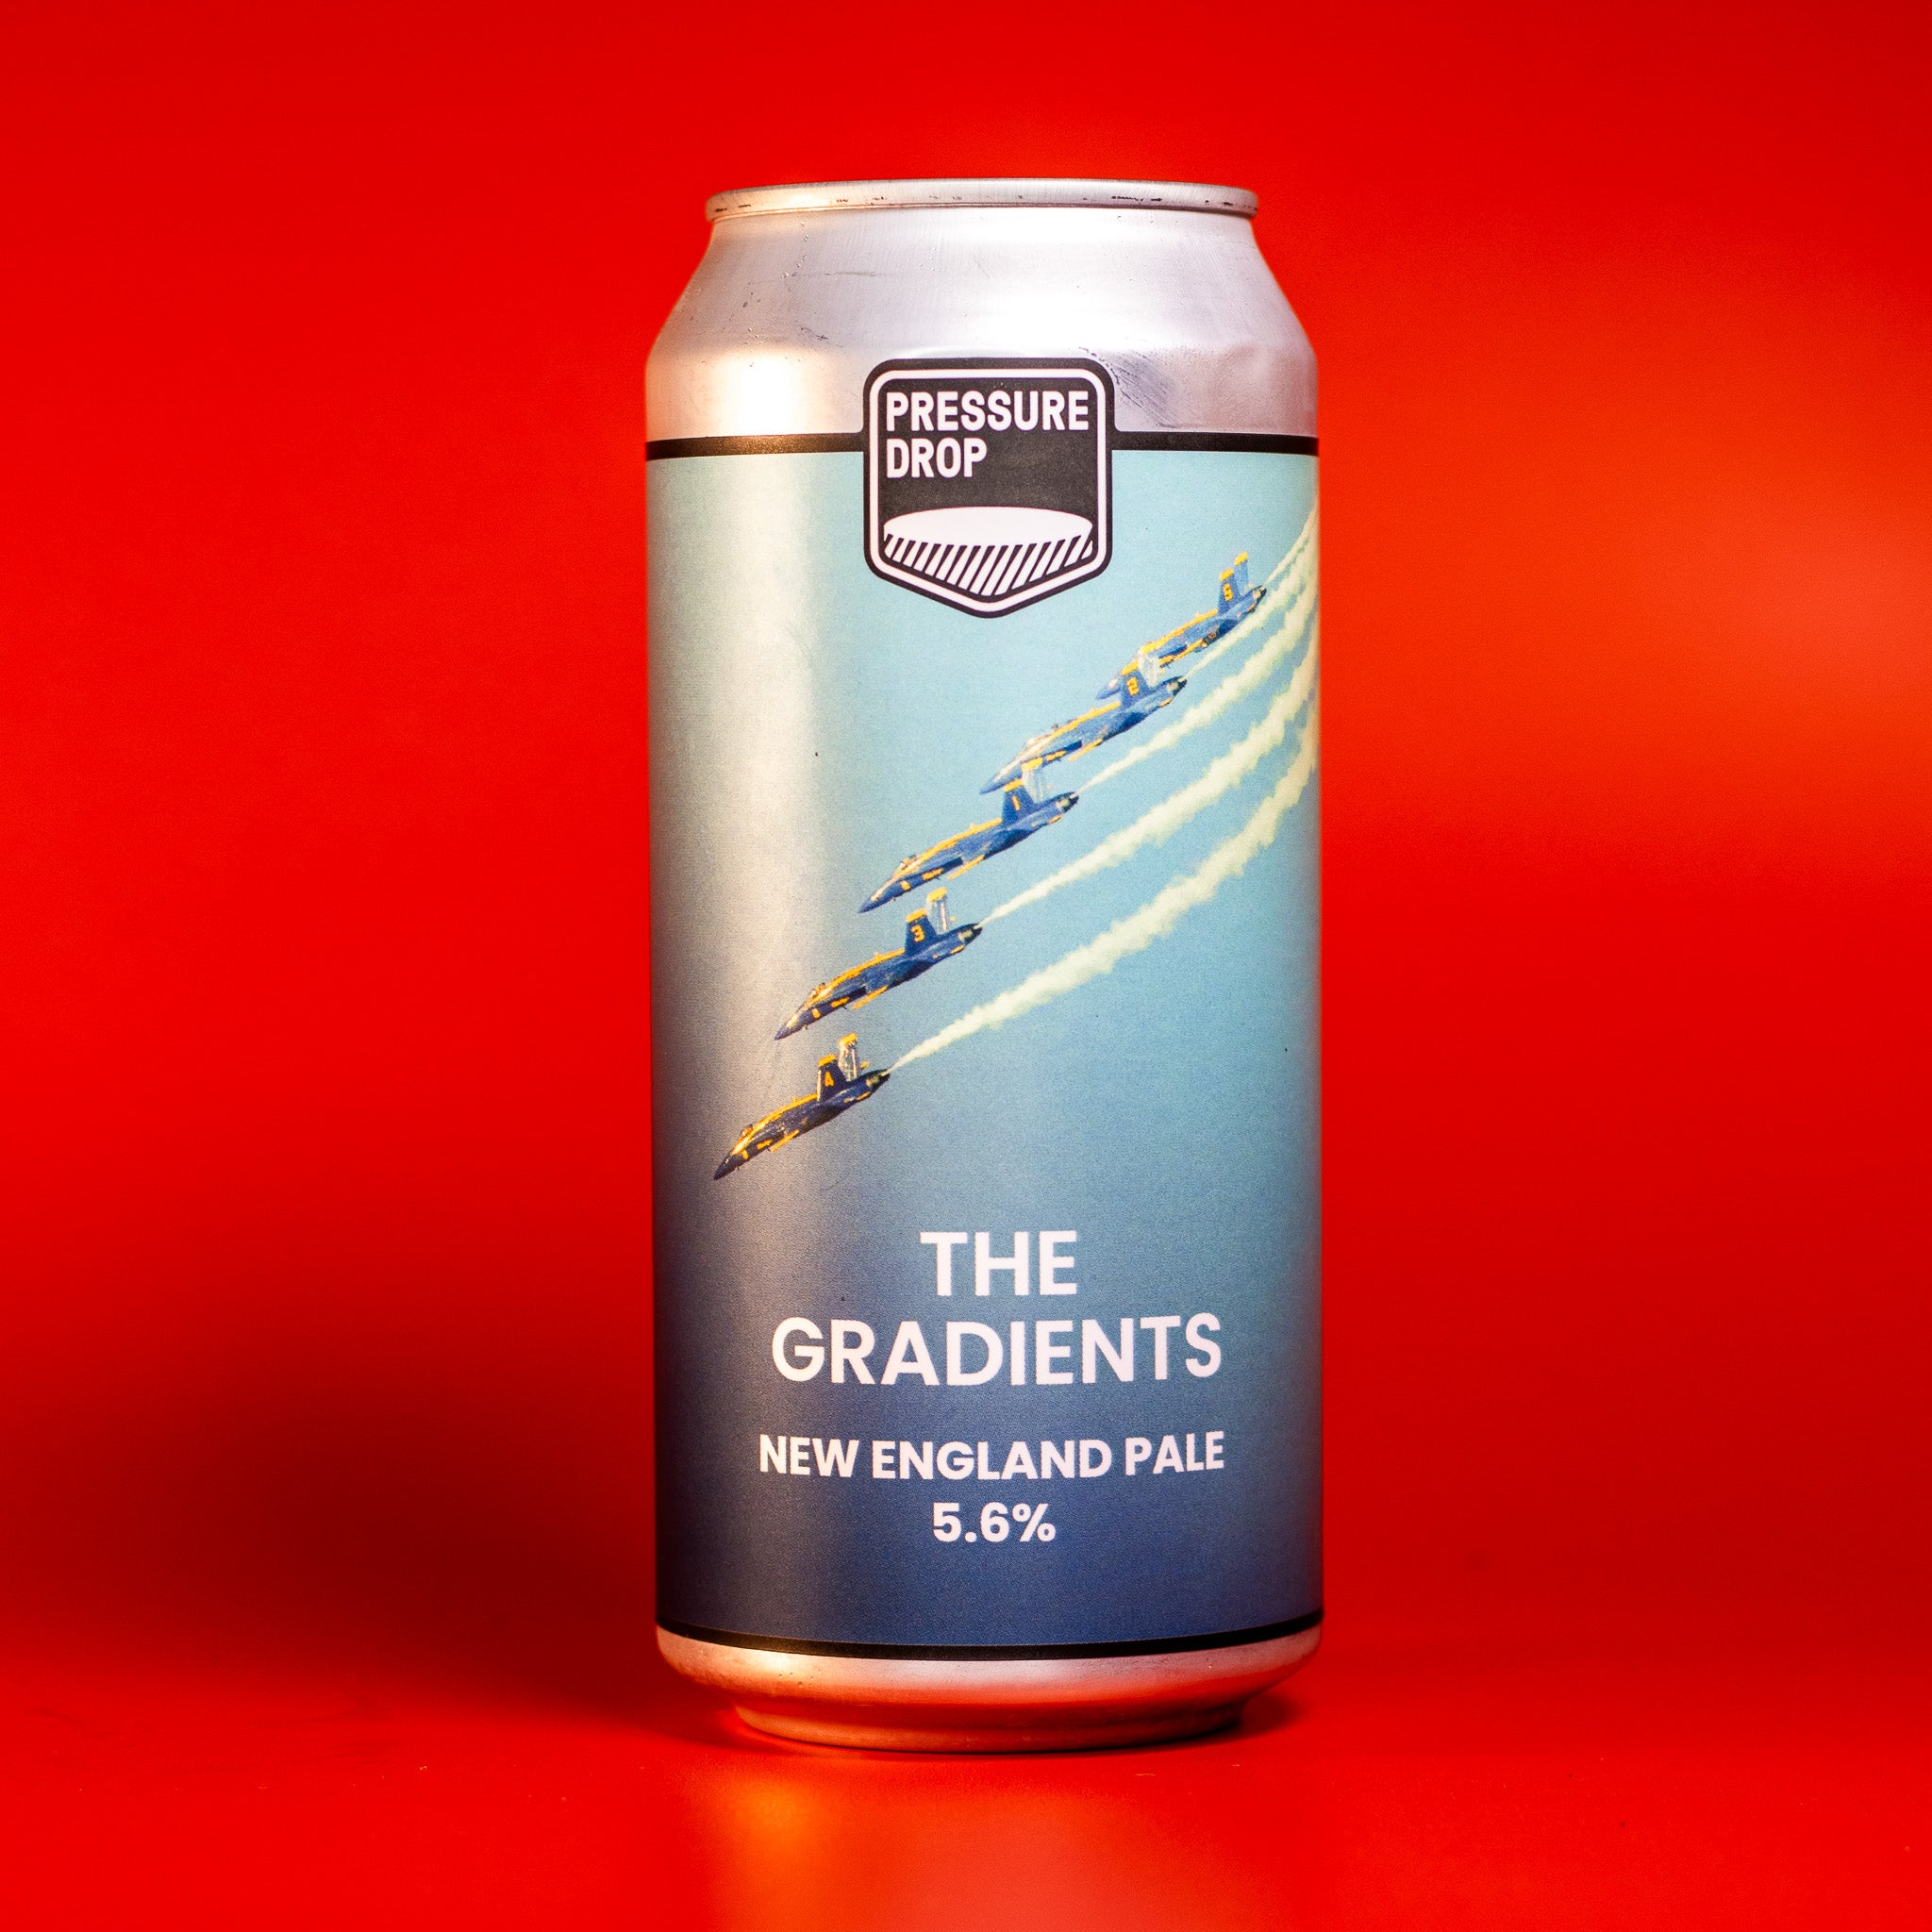 The Gradients 5.8% New England Pale Ale